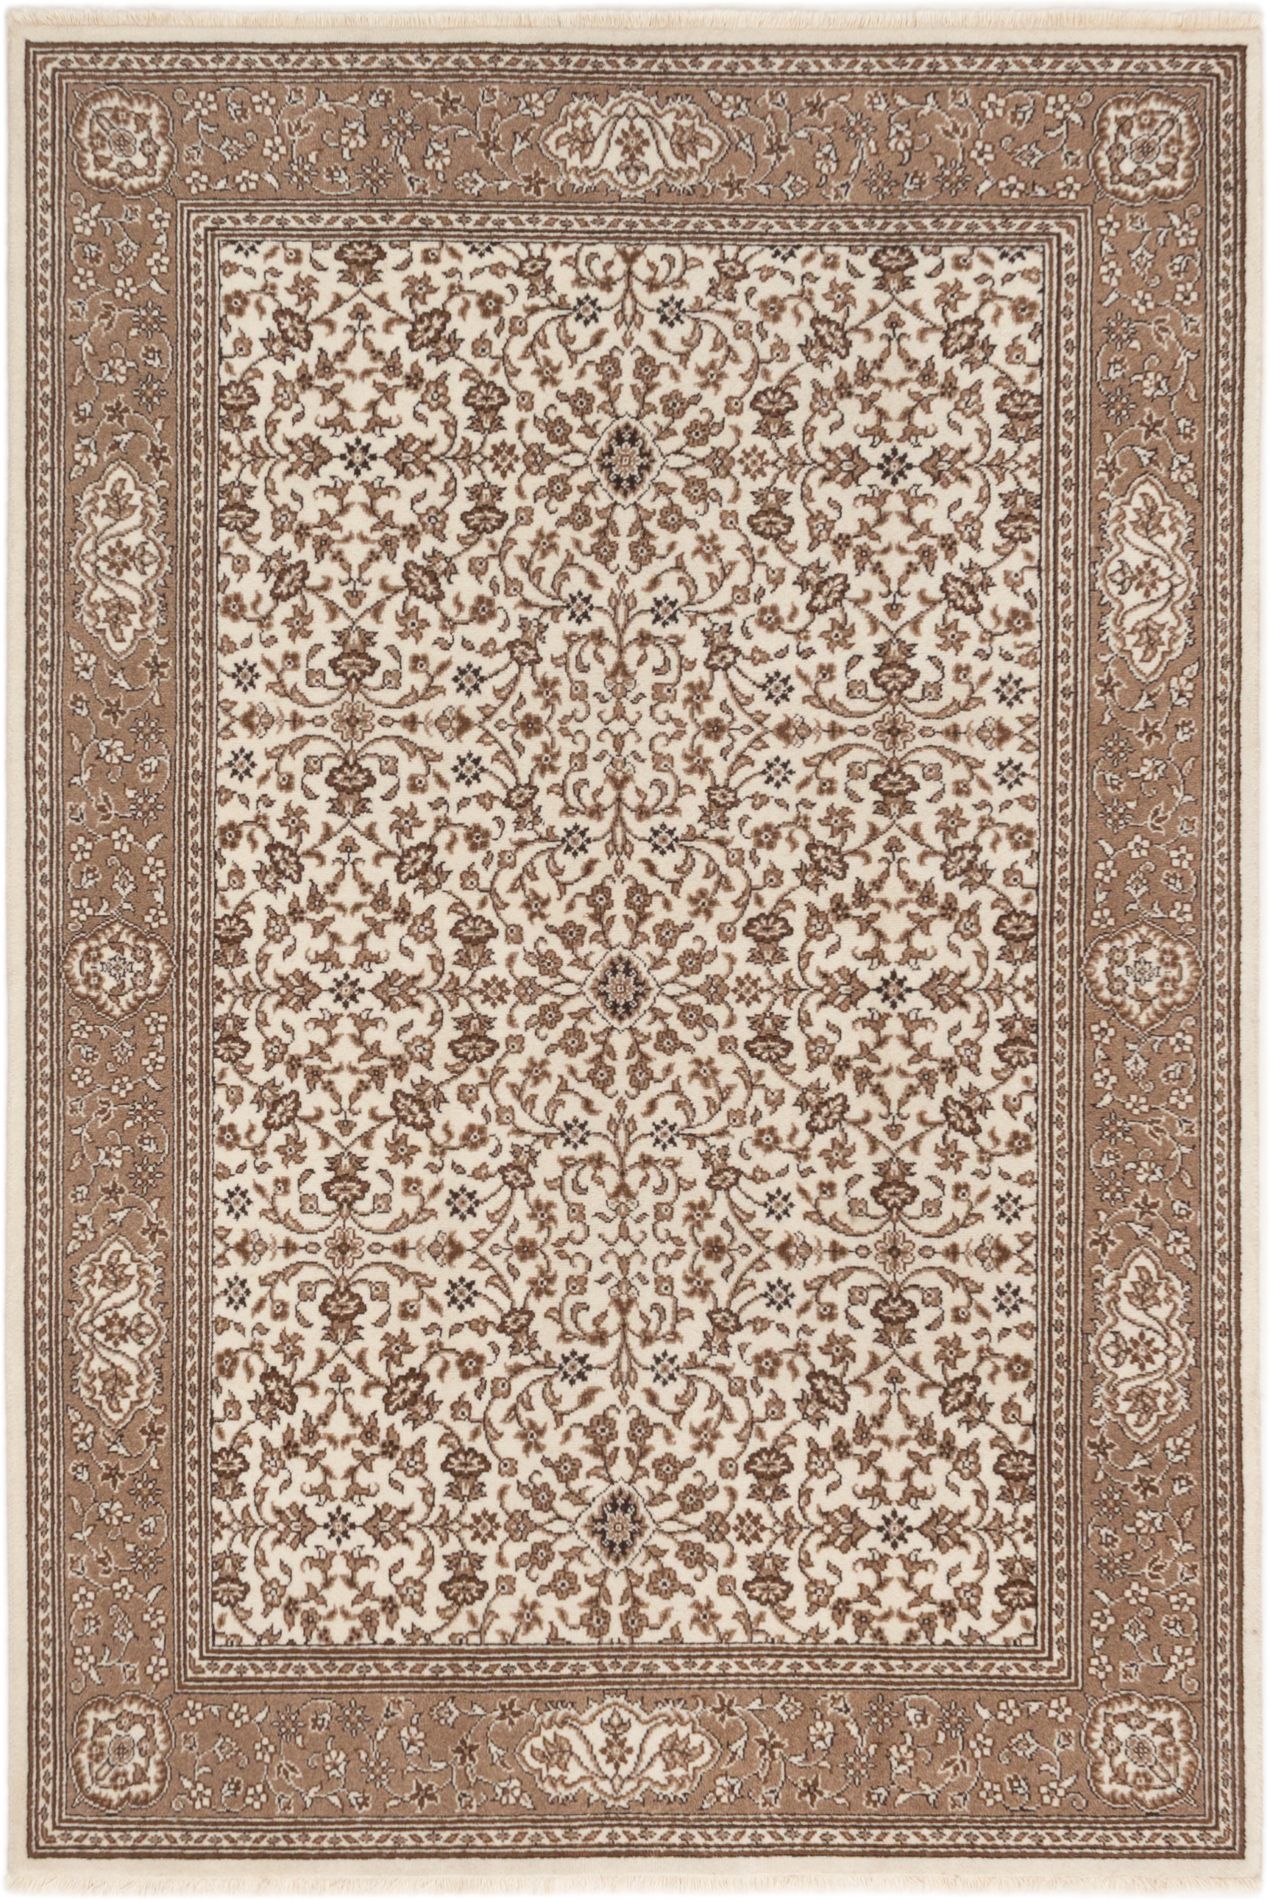 Hand-knotted Royal Kashan Cream Wool Rug 5'9" x 8'7" Size: 5'9" x 8'7"  